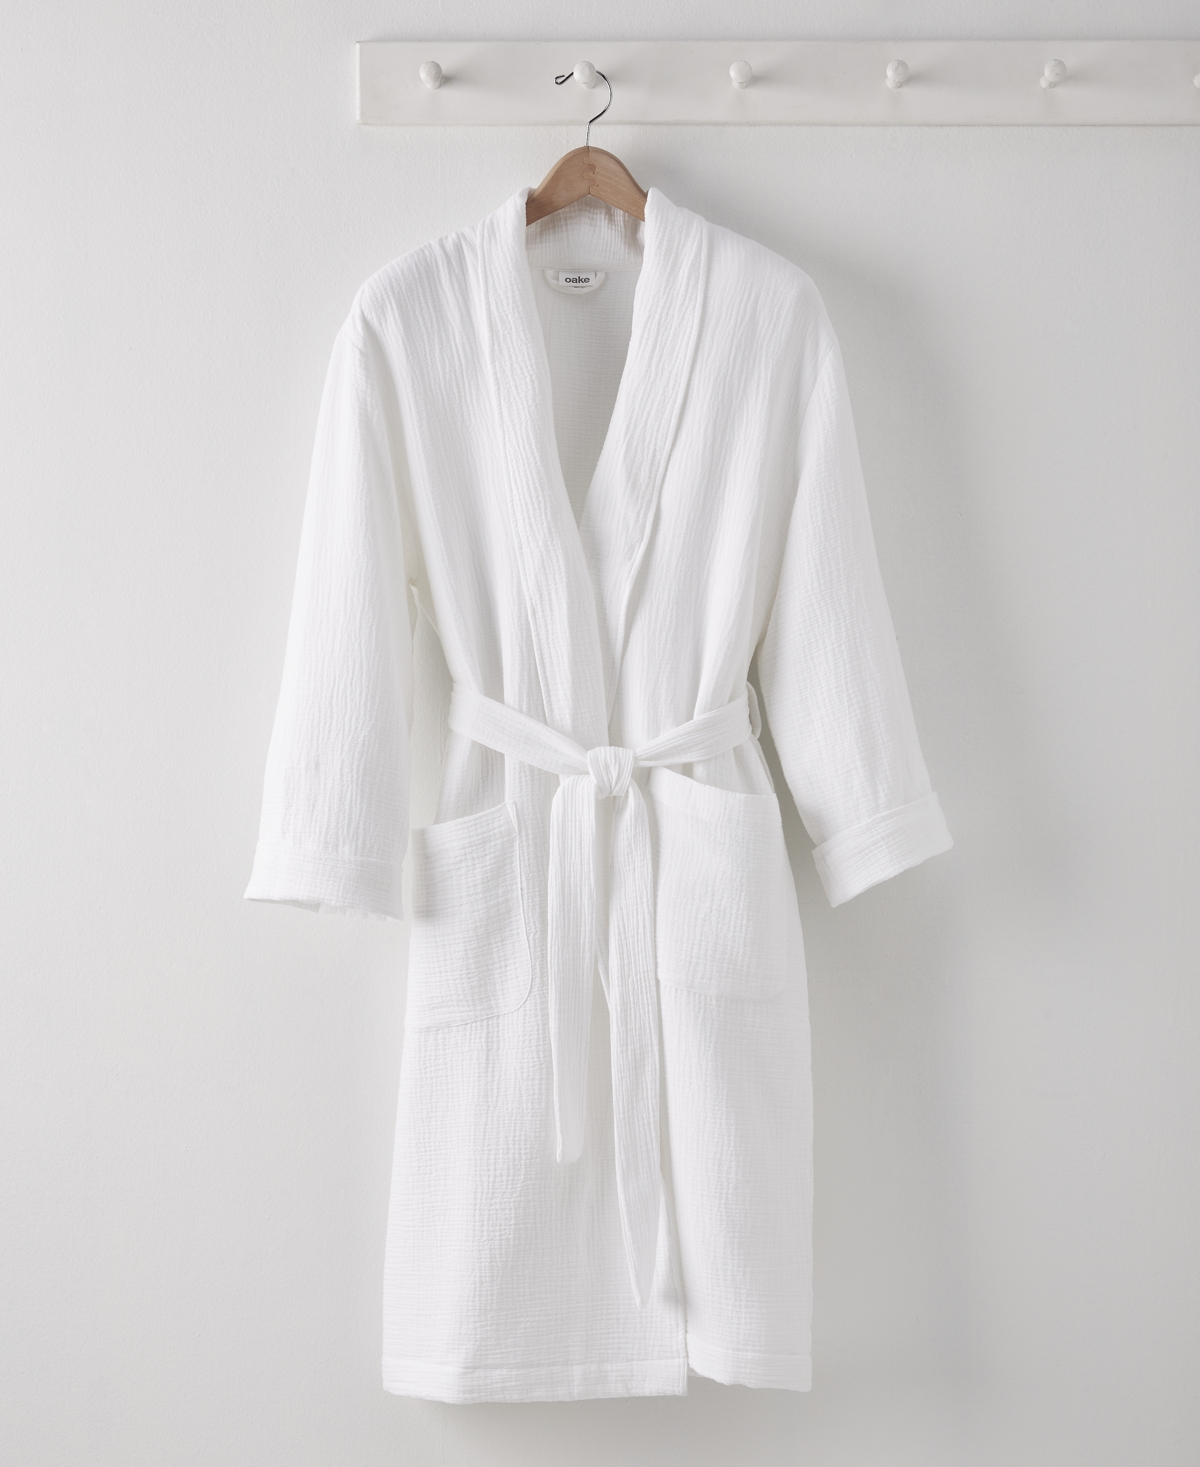 All Cotton Lightweight Gauze Robe, Created for Macy's - Charcoal